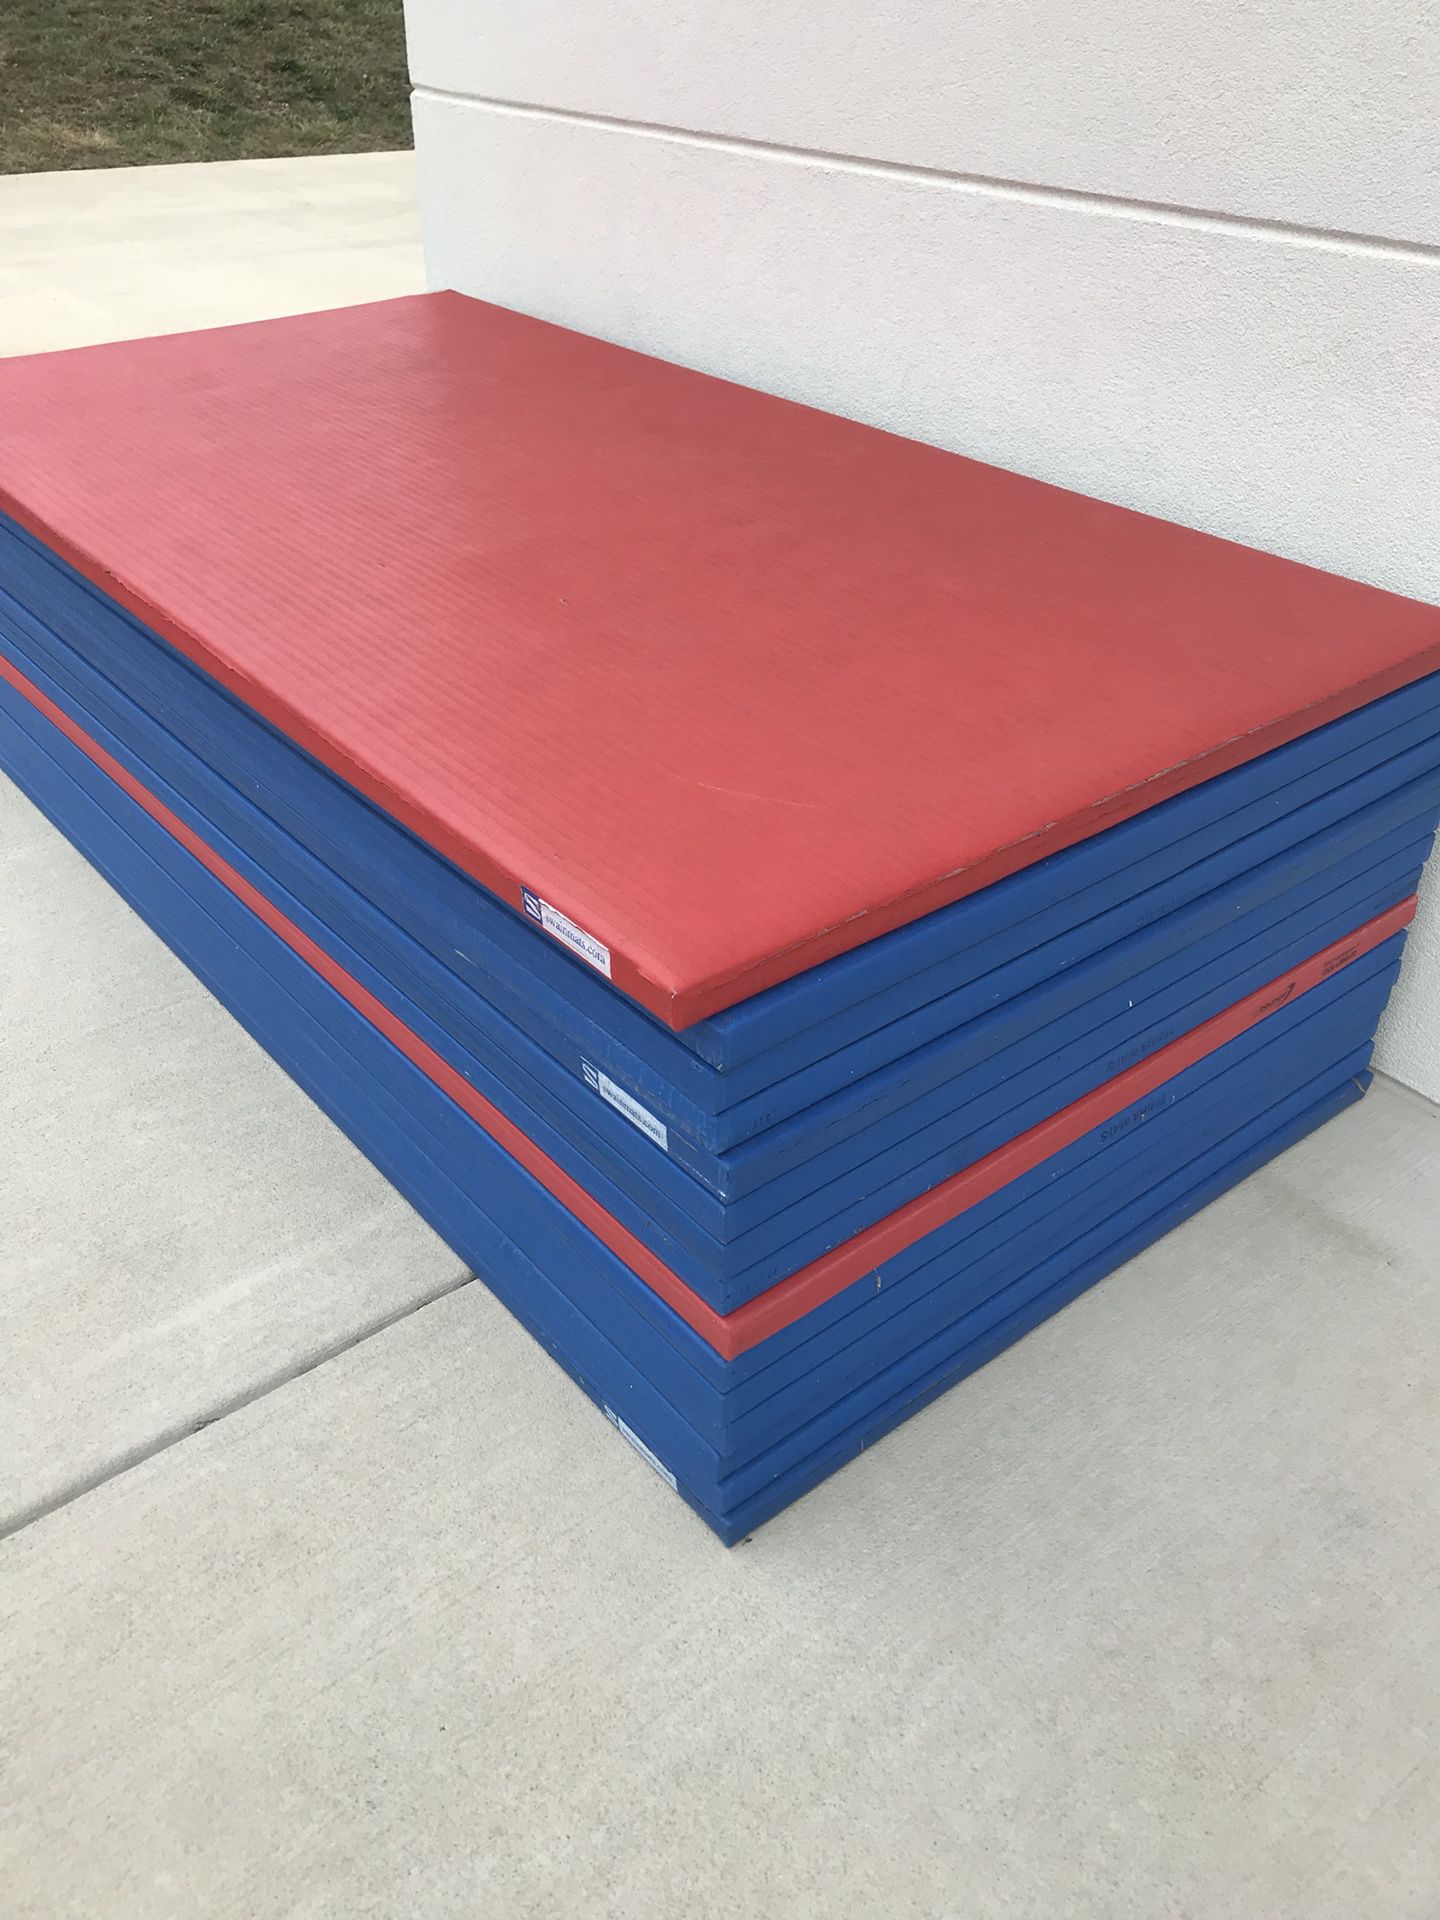 Mats for Sale